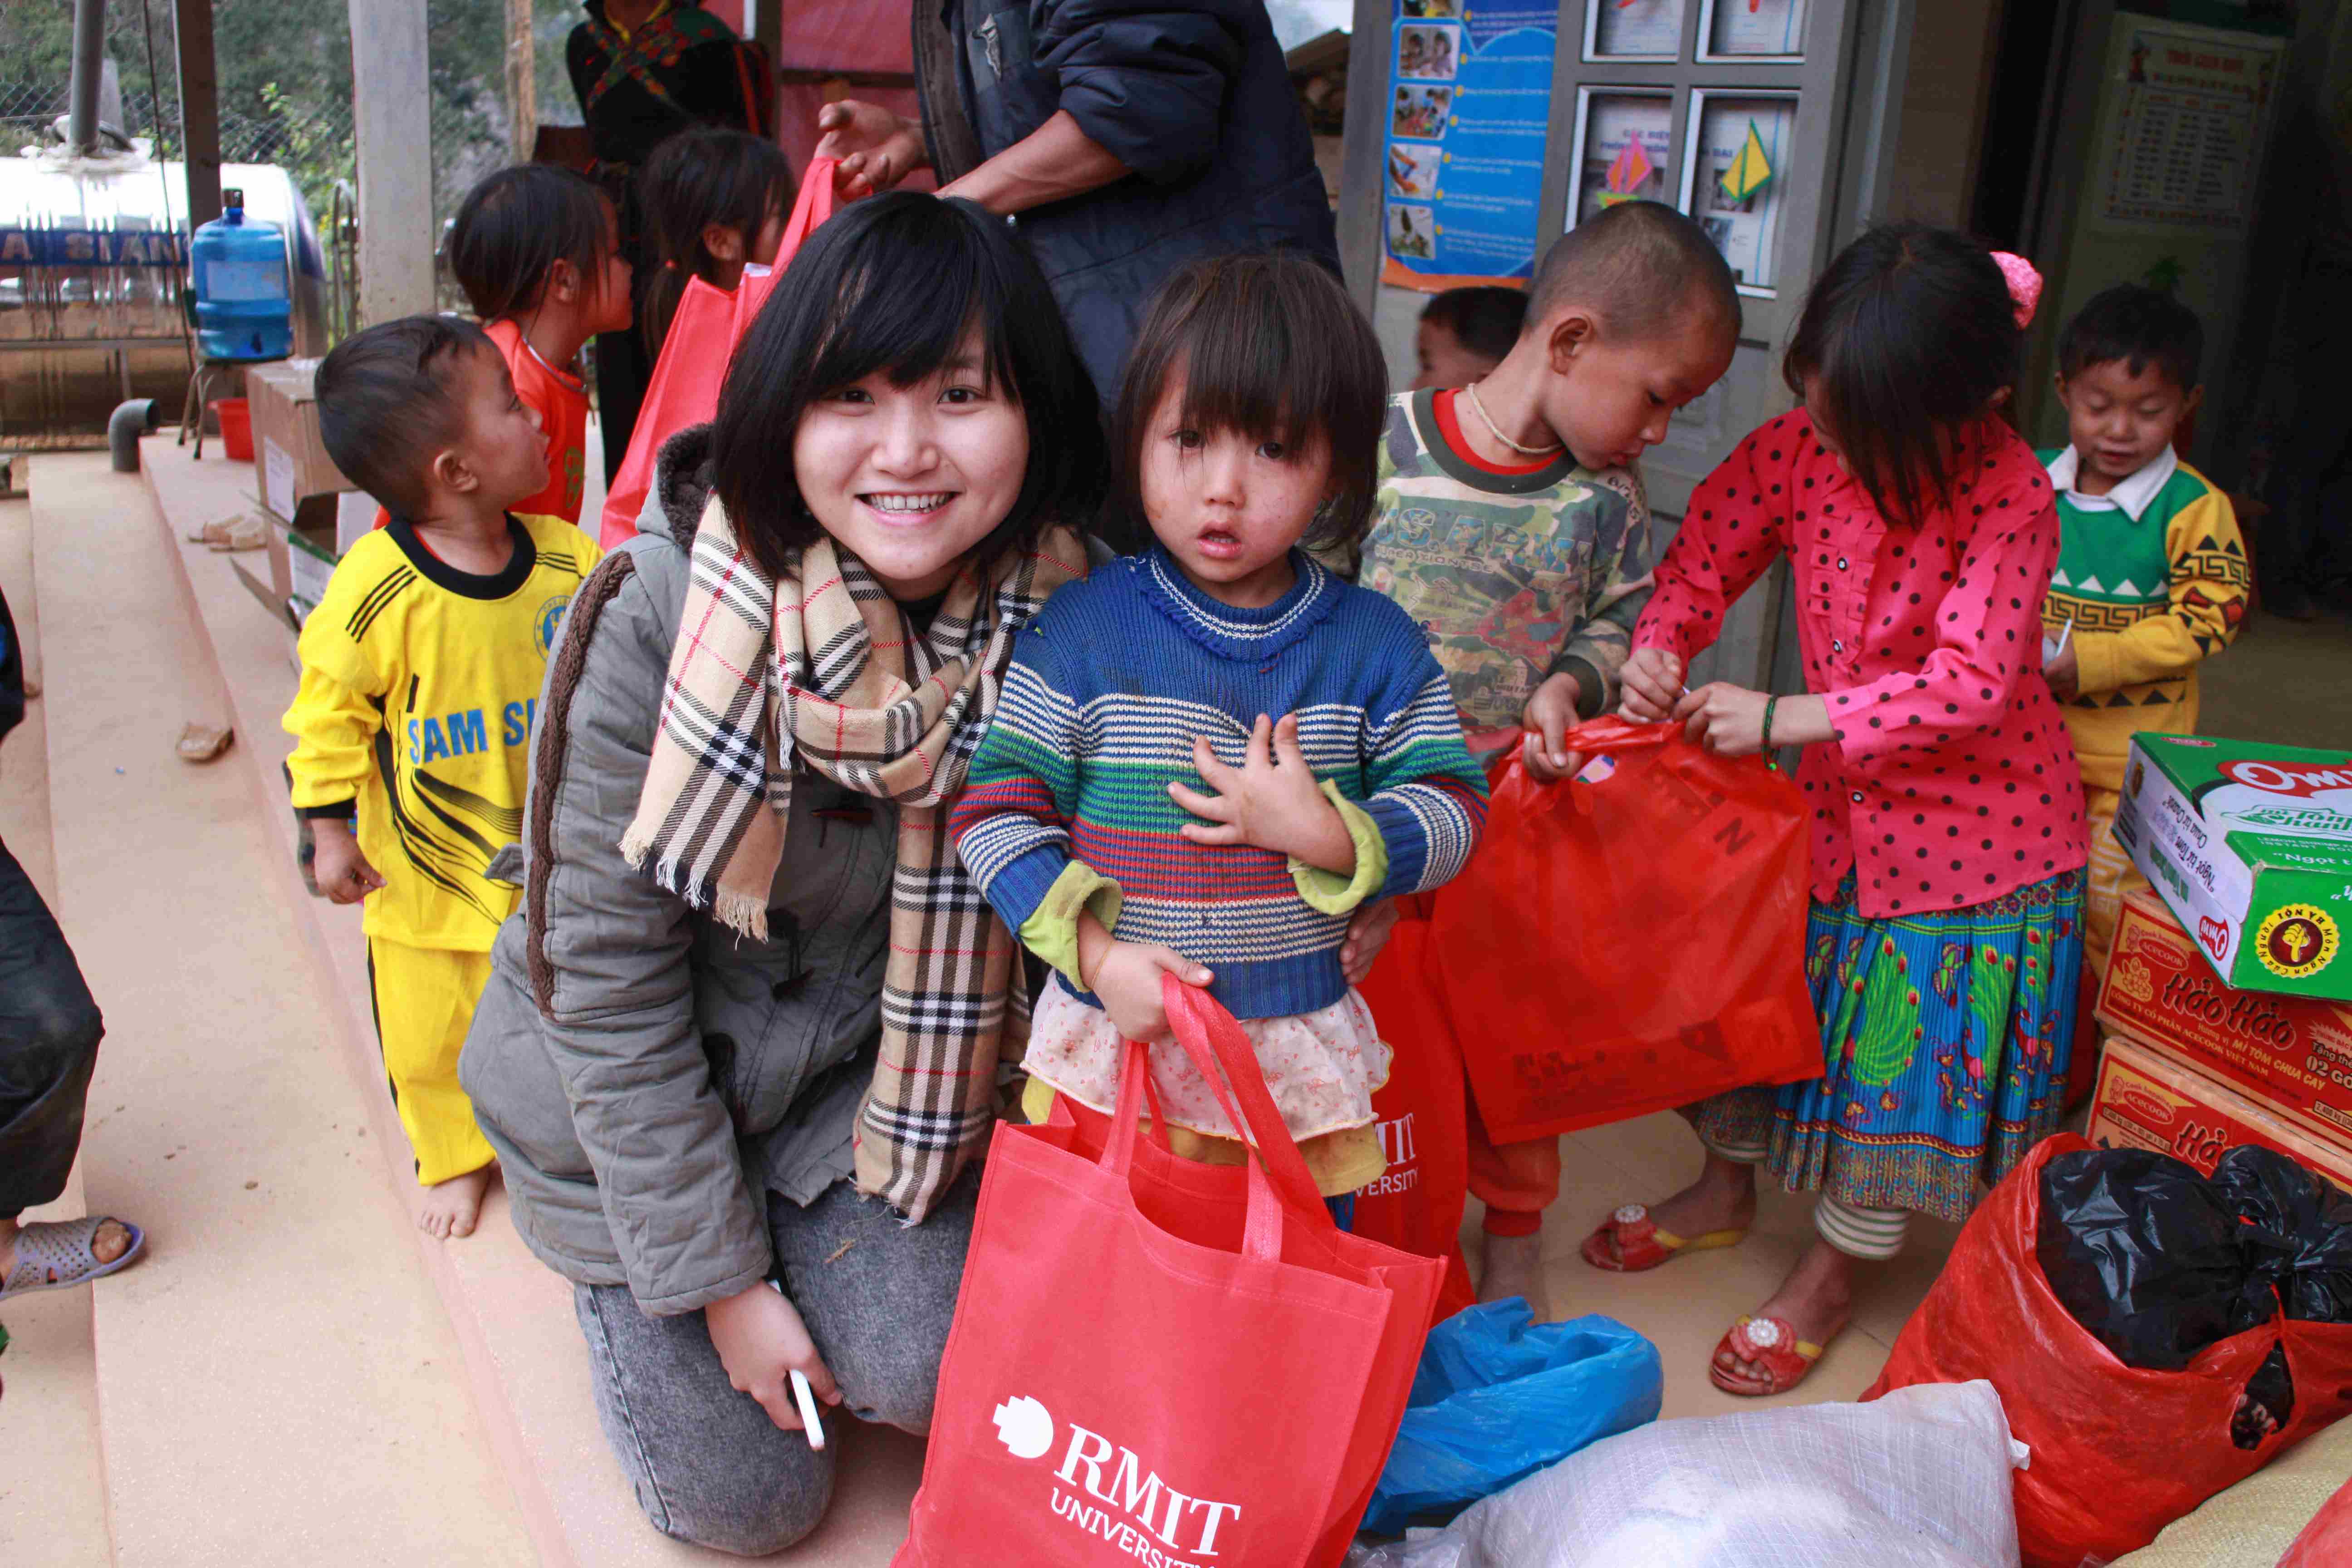 Green Leaf, the staff-initiated charity group at Hanoi City campus, handed out gifts to 40 children at the Xa Lu kindergarten in Chieng Khua ward, Moc Chau, 220 kilometres away from Hanoi.